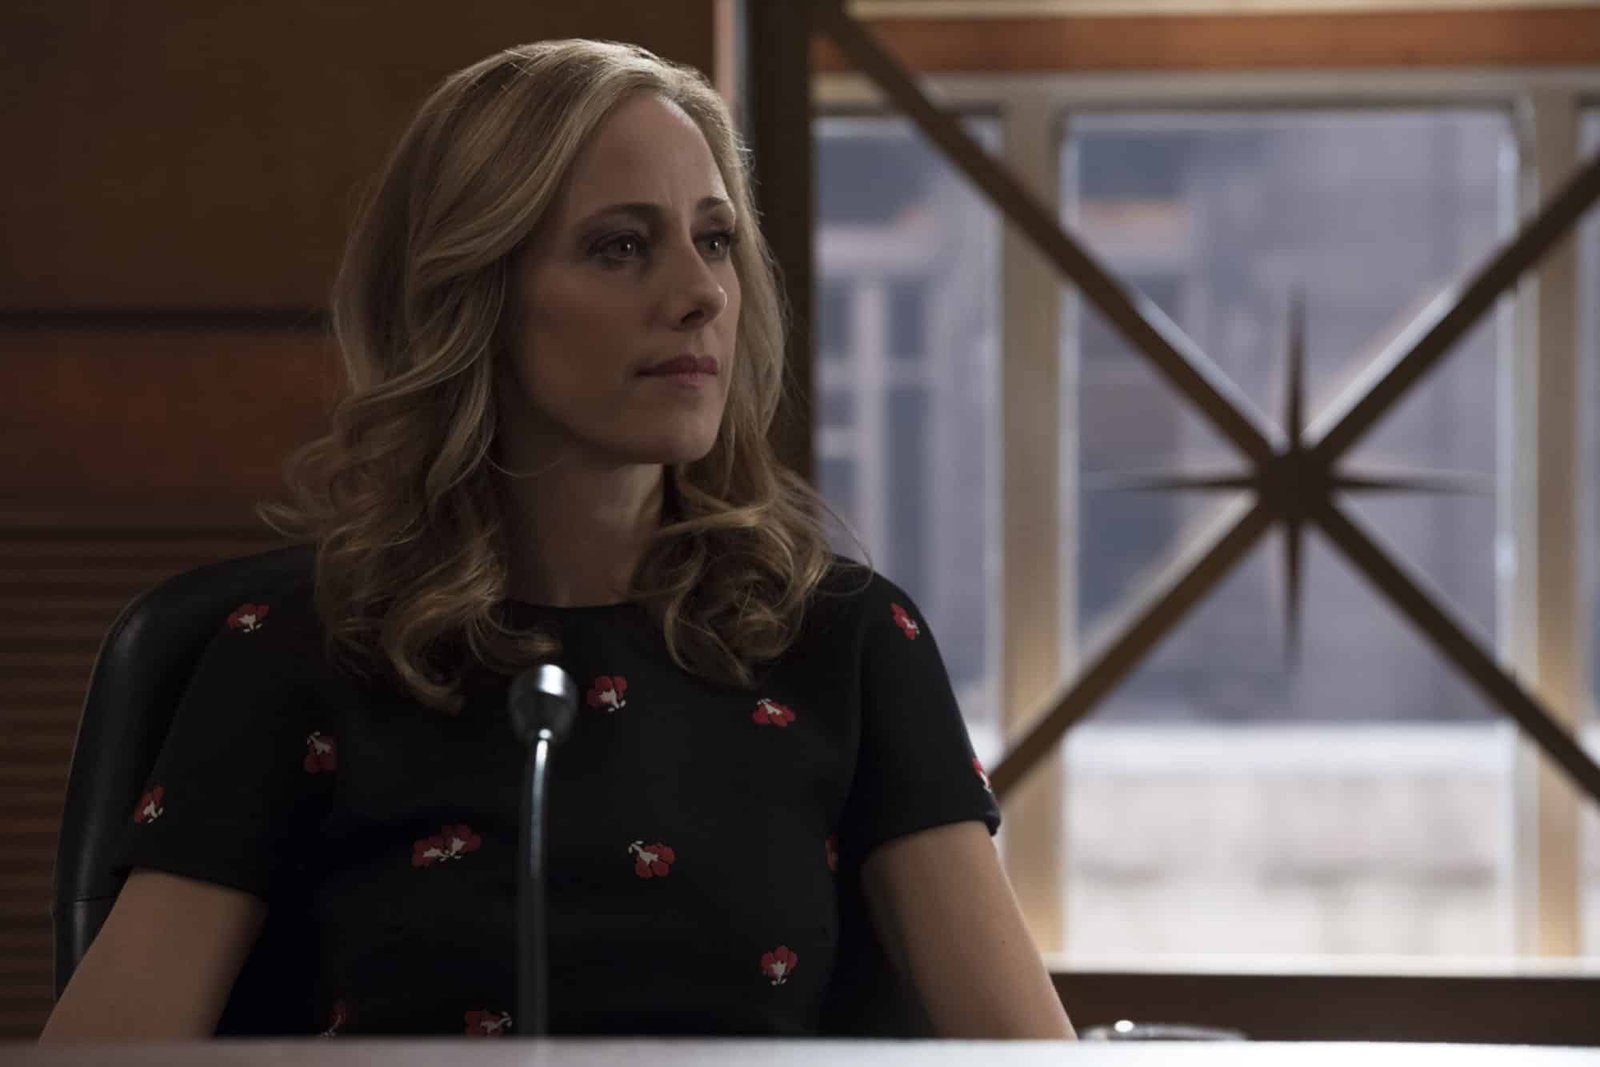 Andrea Frost (played by Kim Raver) - Designated Survivor